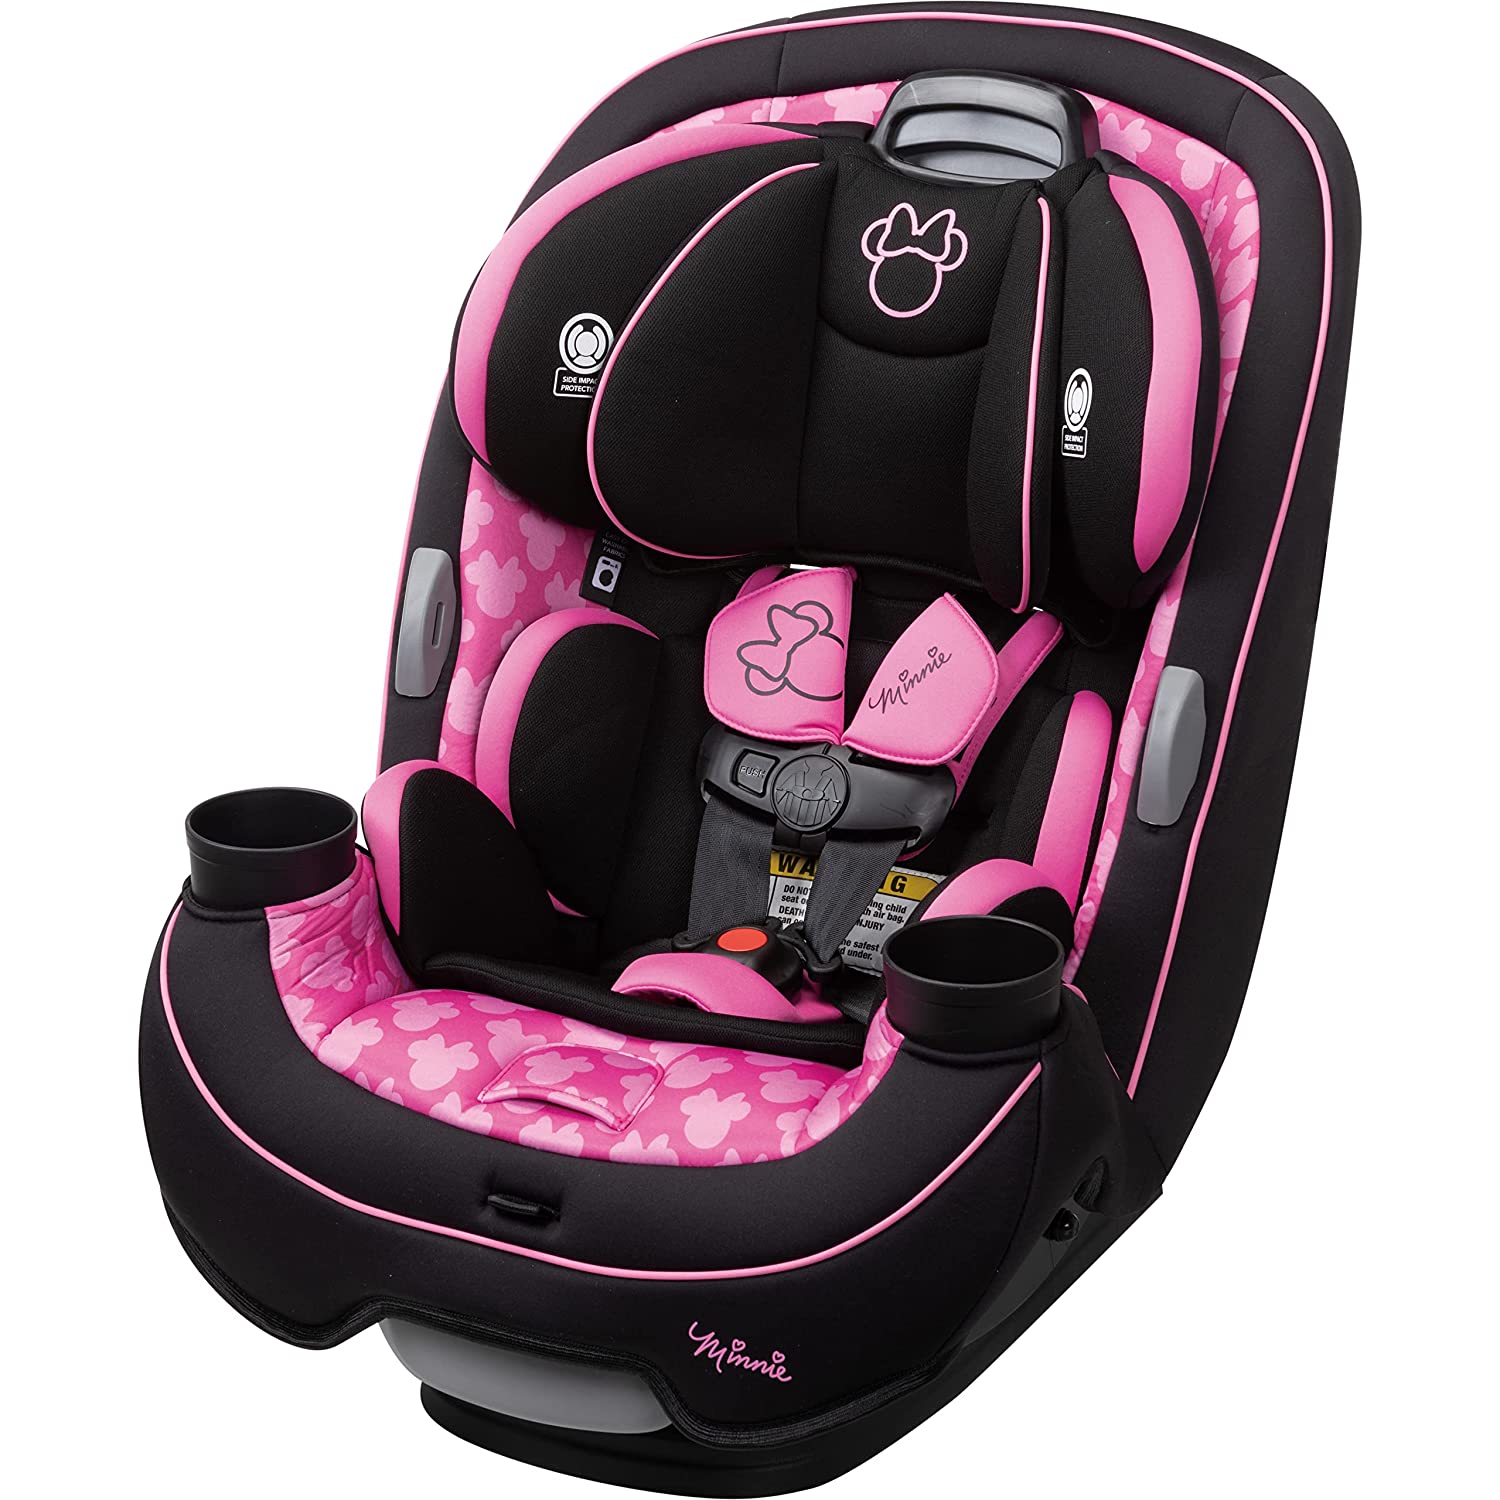 Best convertible car seats (Disney Baby Grow and Go All-in-One Convertible Car Seat)